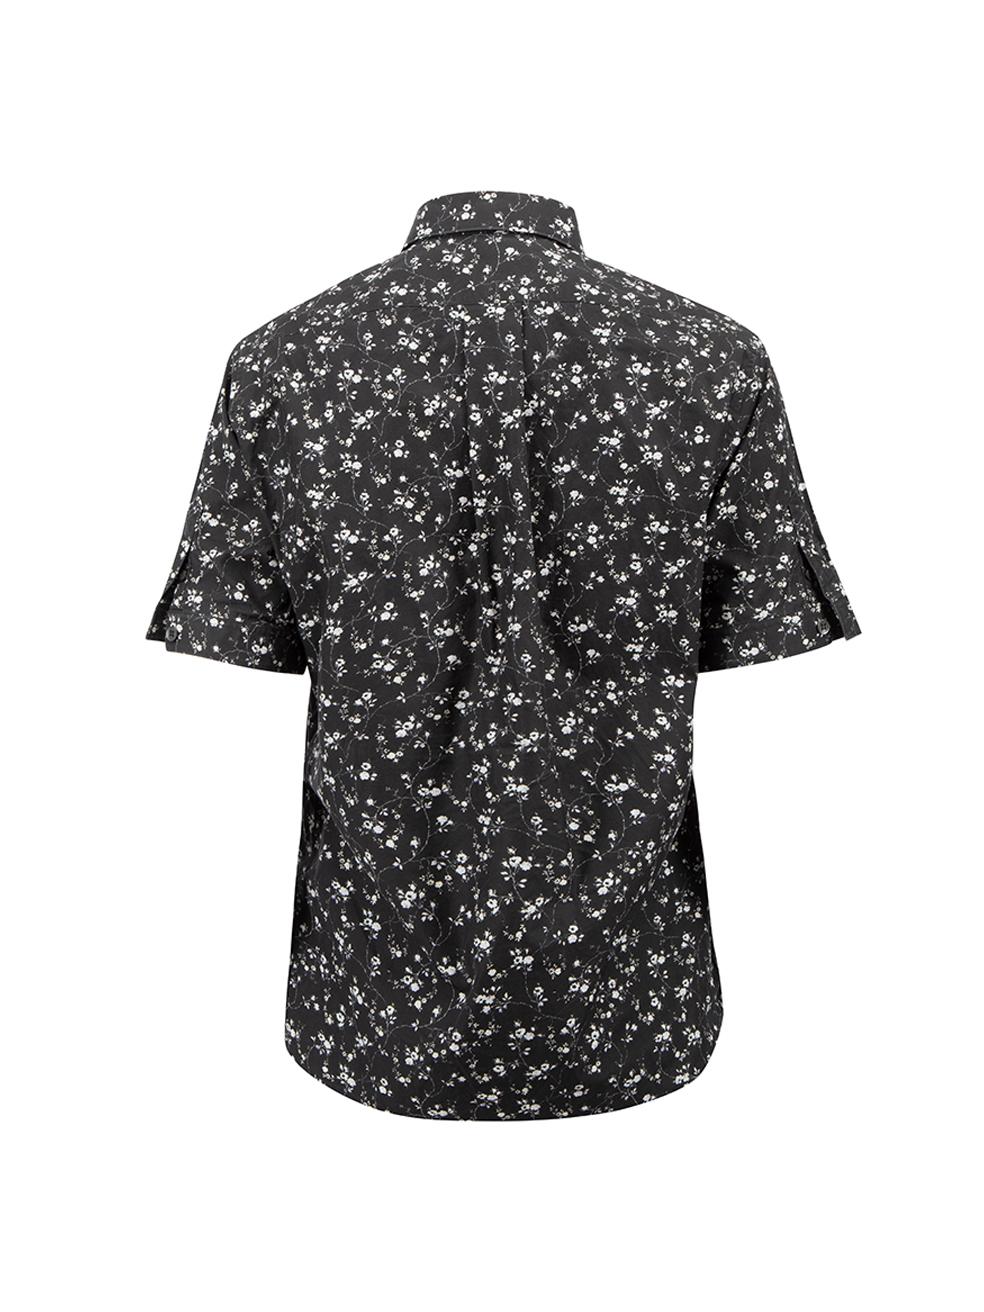 Alexander McQueen Black Floral Short Sleeve Shirt Size M In Good Condition In London, GB